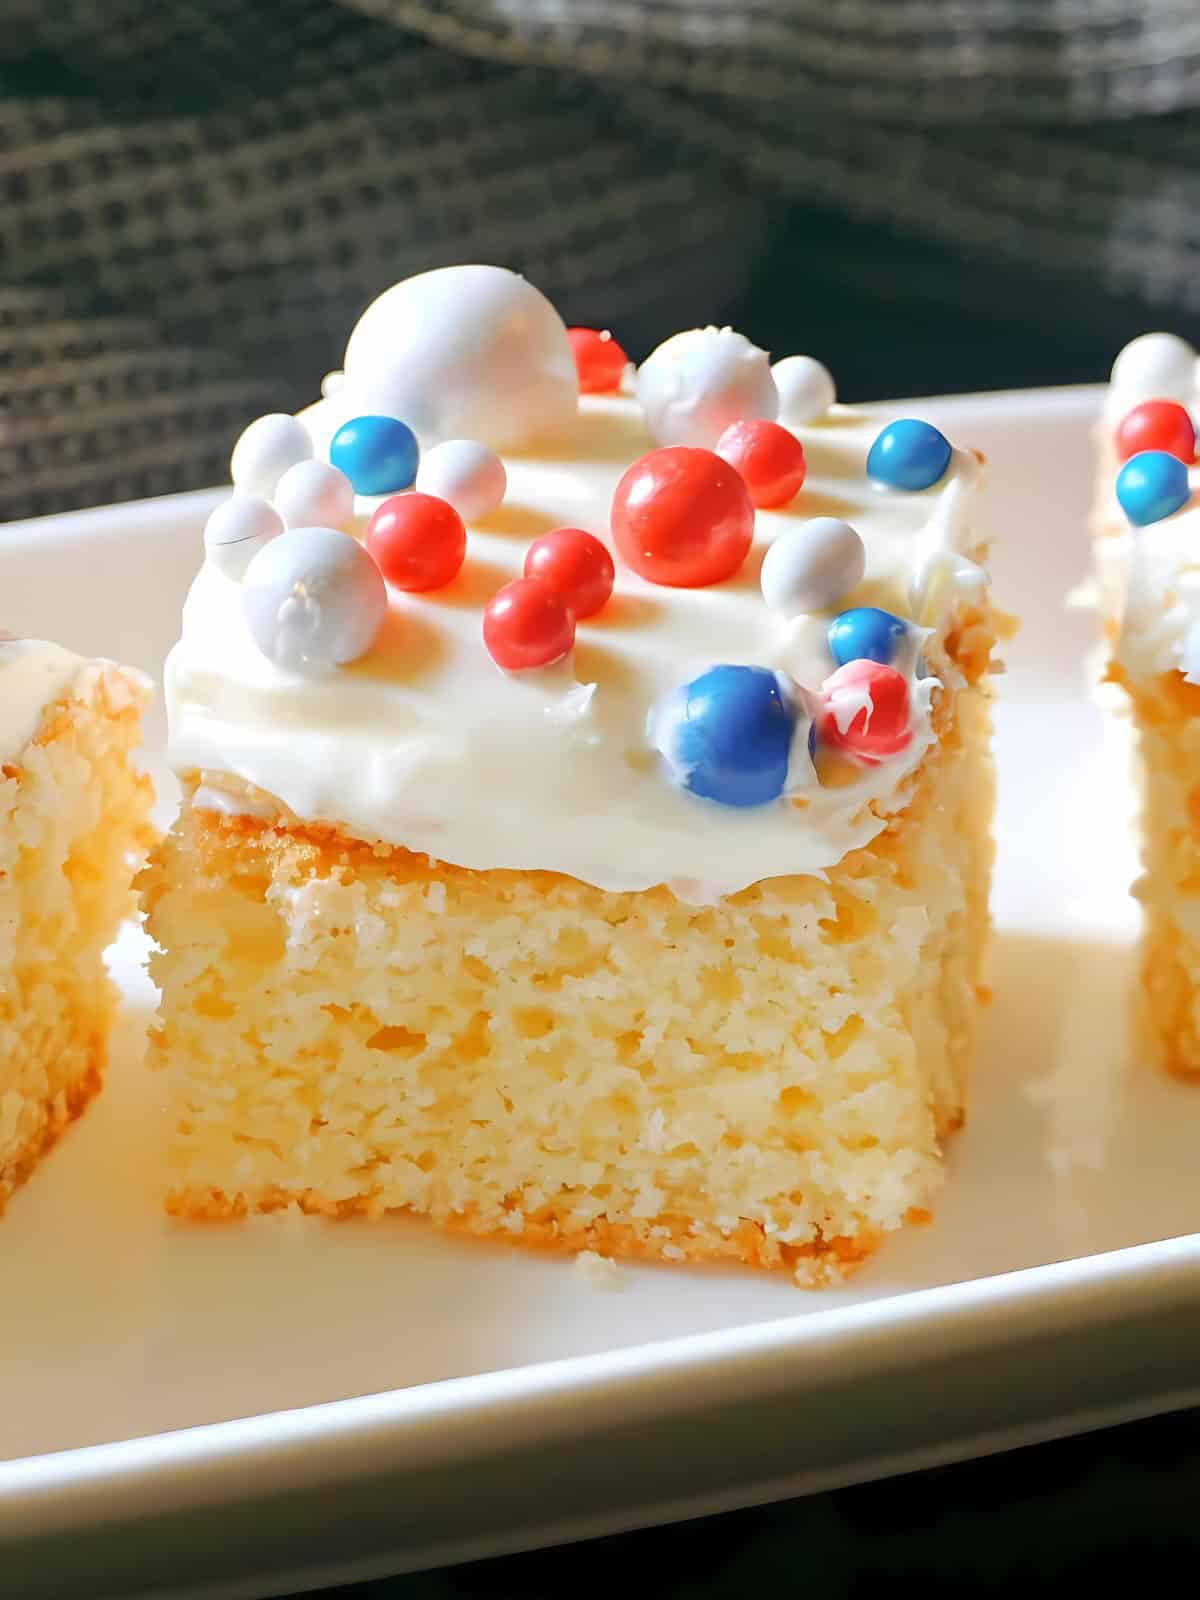 Traybake sponge cakes with red white and blue toppings.